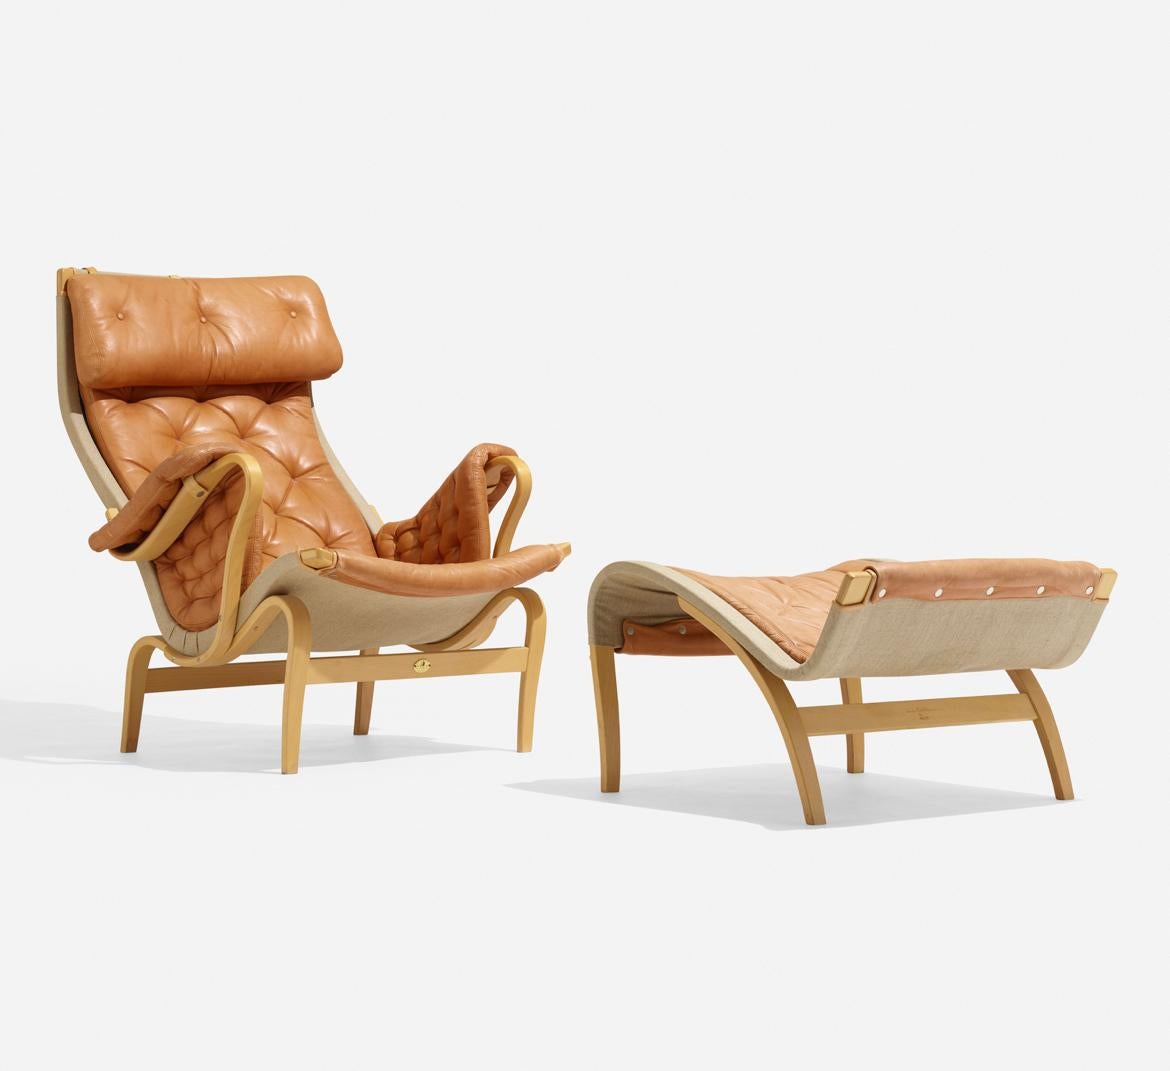 Bruno Mathsson Pernilla 69 lounge chair and ottoman. DUX, Sweden, 1969. Leather, beech plywood, canvas.
Chair measures: 38¼ h × 35 w × 37 d in (97 × 89 × 94 cm)
Ottoman measures: 16 h × 24½ w × 28 d in (41 × 62 × 71 cm)